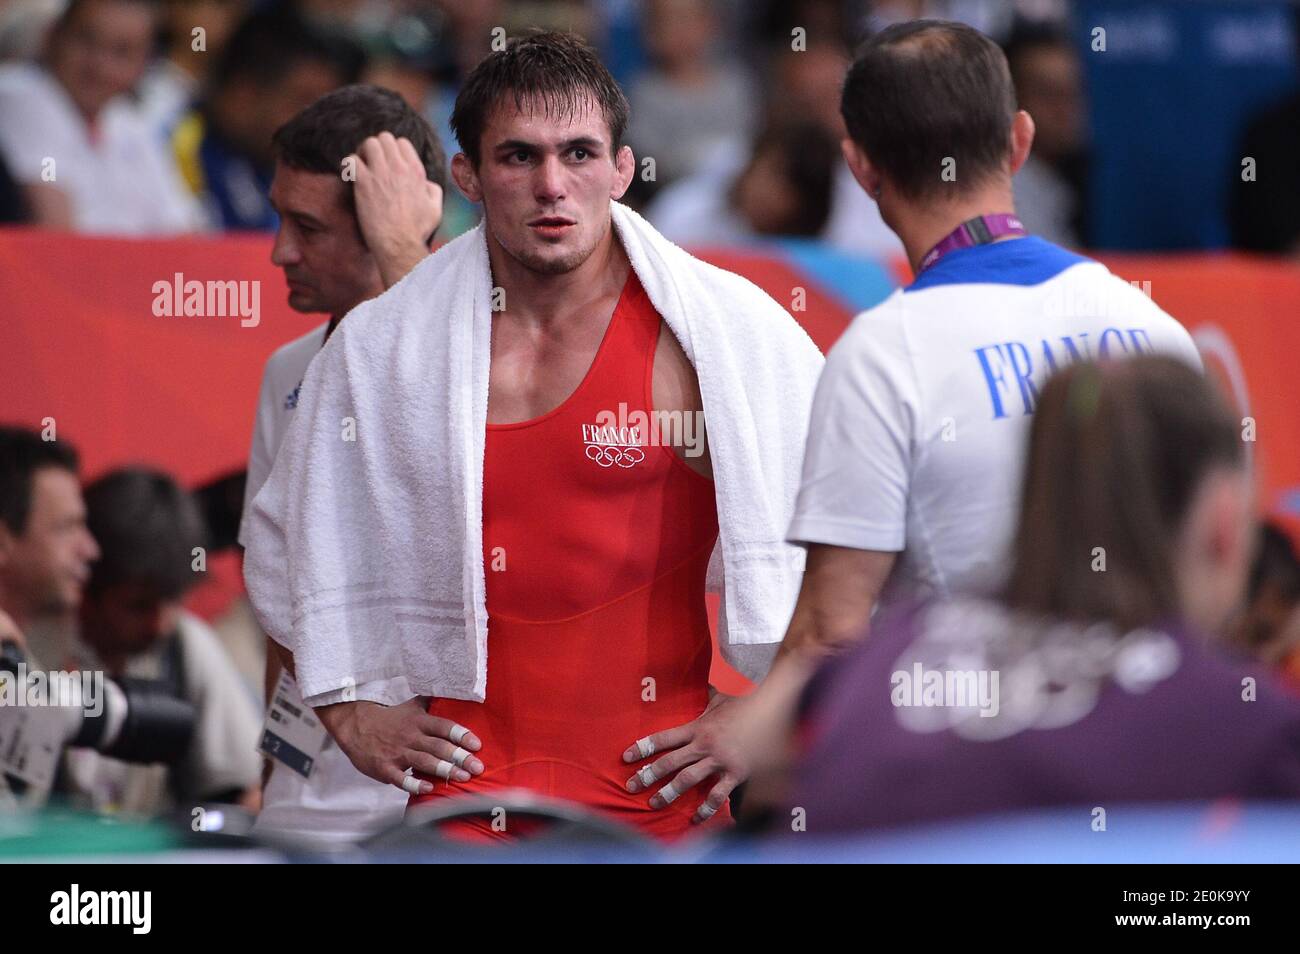 France's Steeve Guenot during the 66-kg Greco-Roman wrestling at the London Olympics in London, UK on August 7, 2012. Photo by Gouhier-Guibbaud-JMP/ABACAPRESS.COM Stock Photo